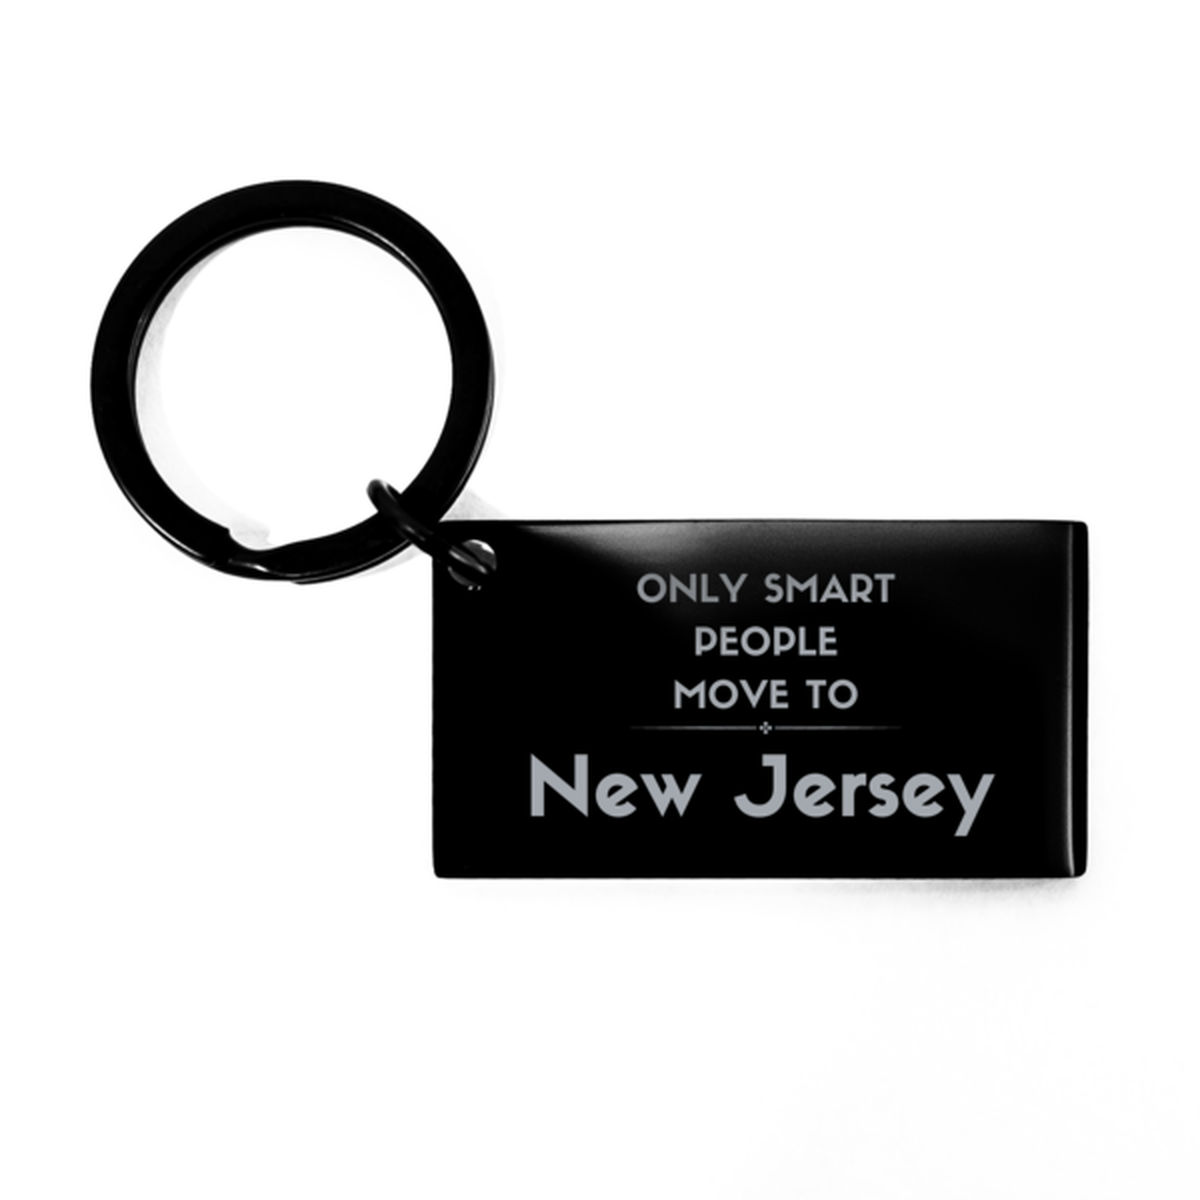 Only smart people move to New Jersey Keychain, Gag Gifts For New Jersey, Move to New Jersey Gifts for Friends Coworker Funny Saying Quote